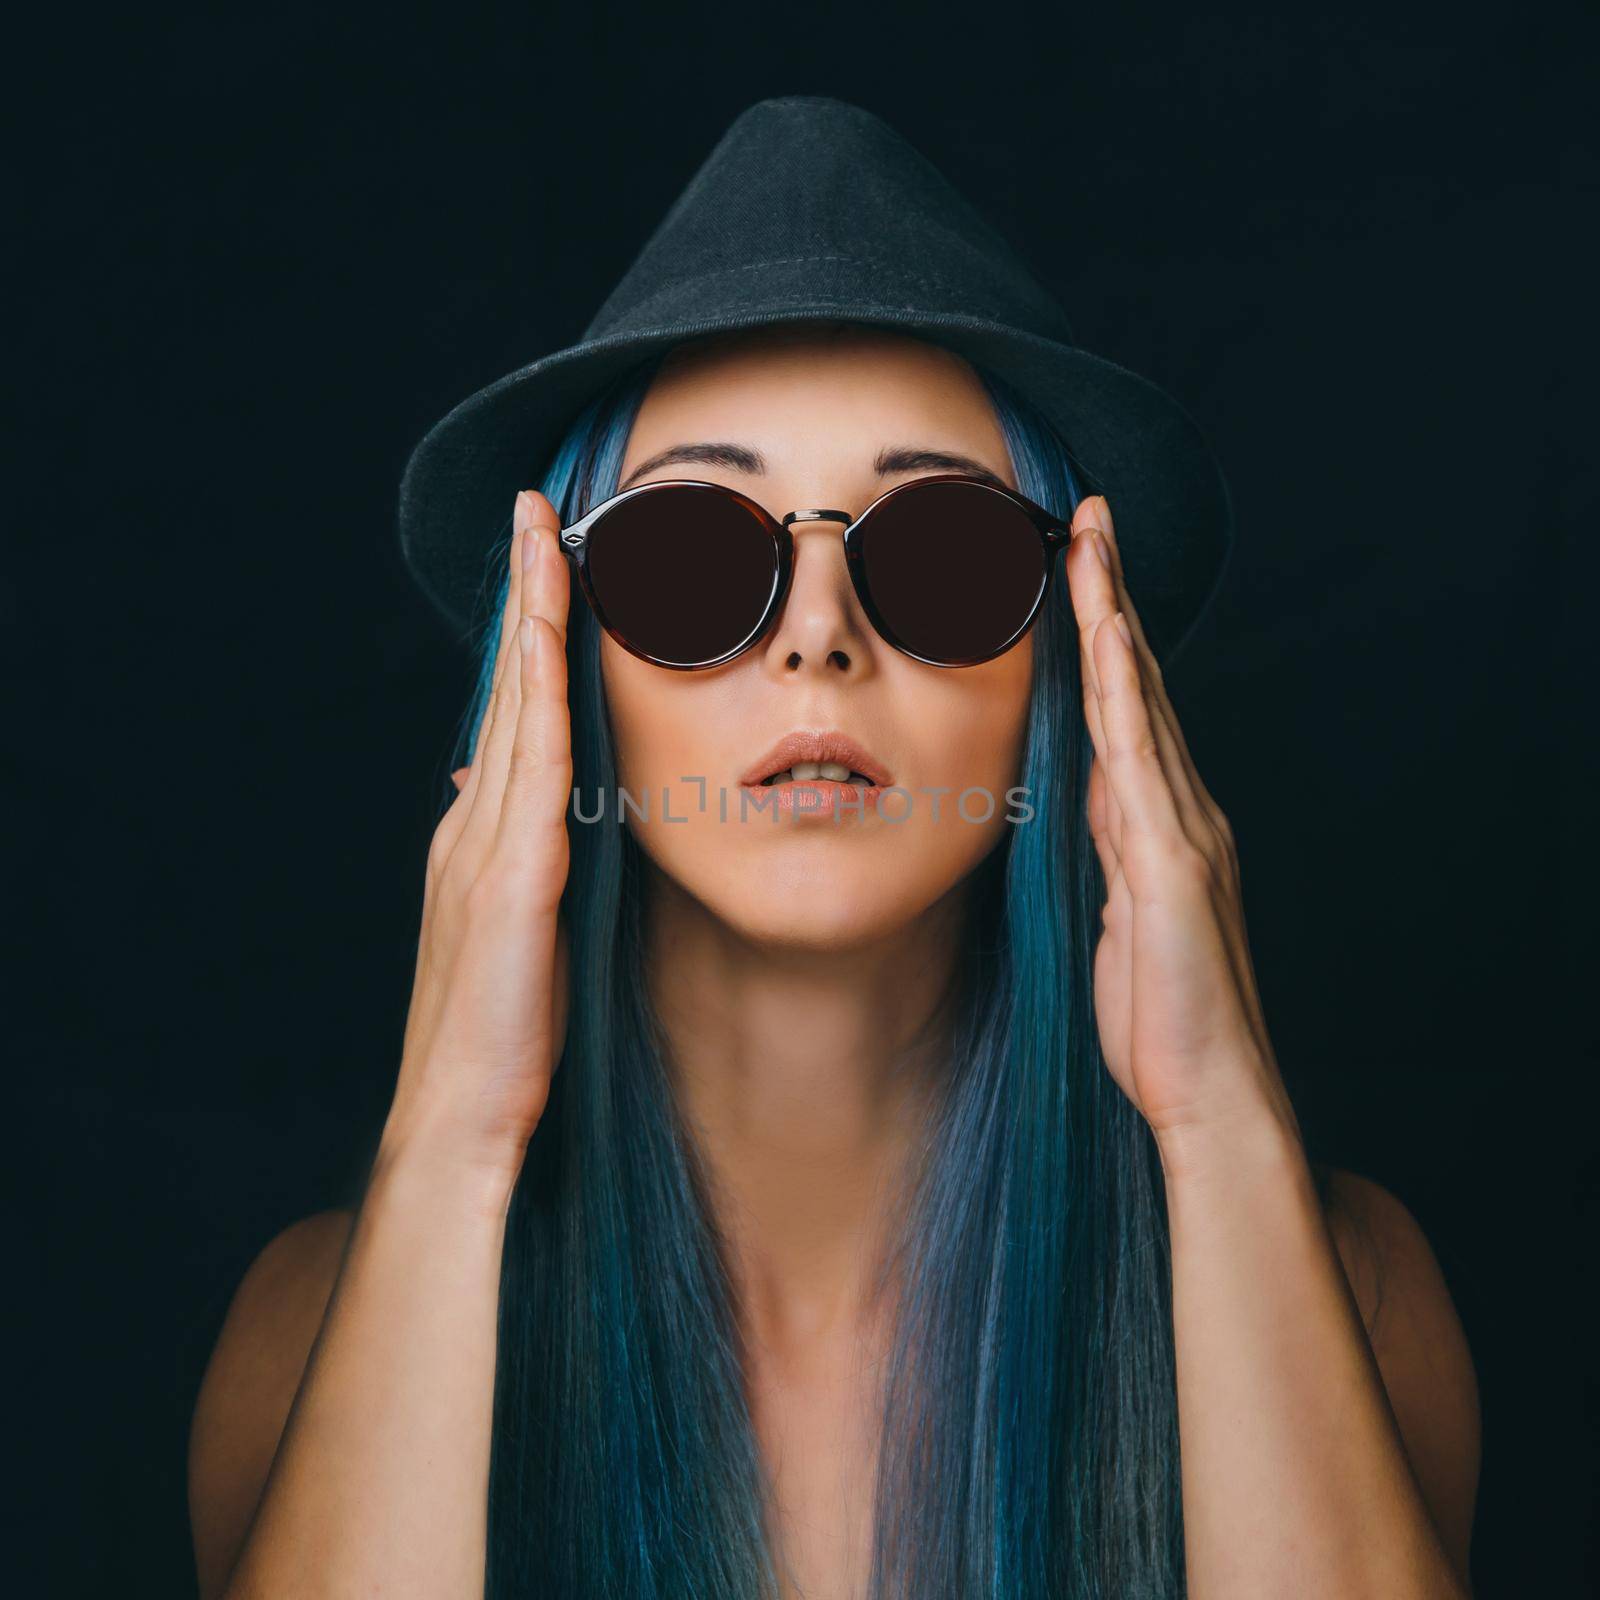 Beautiful young woman with long blue hair in round sunglasses and hat. Fashion and beauty